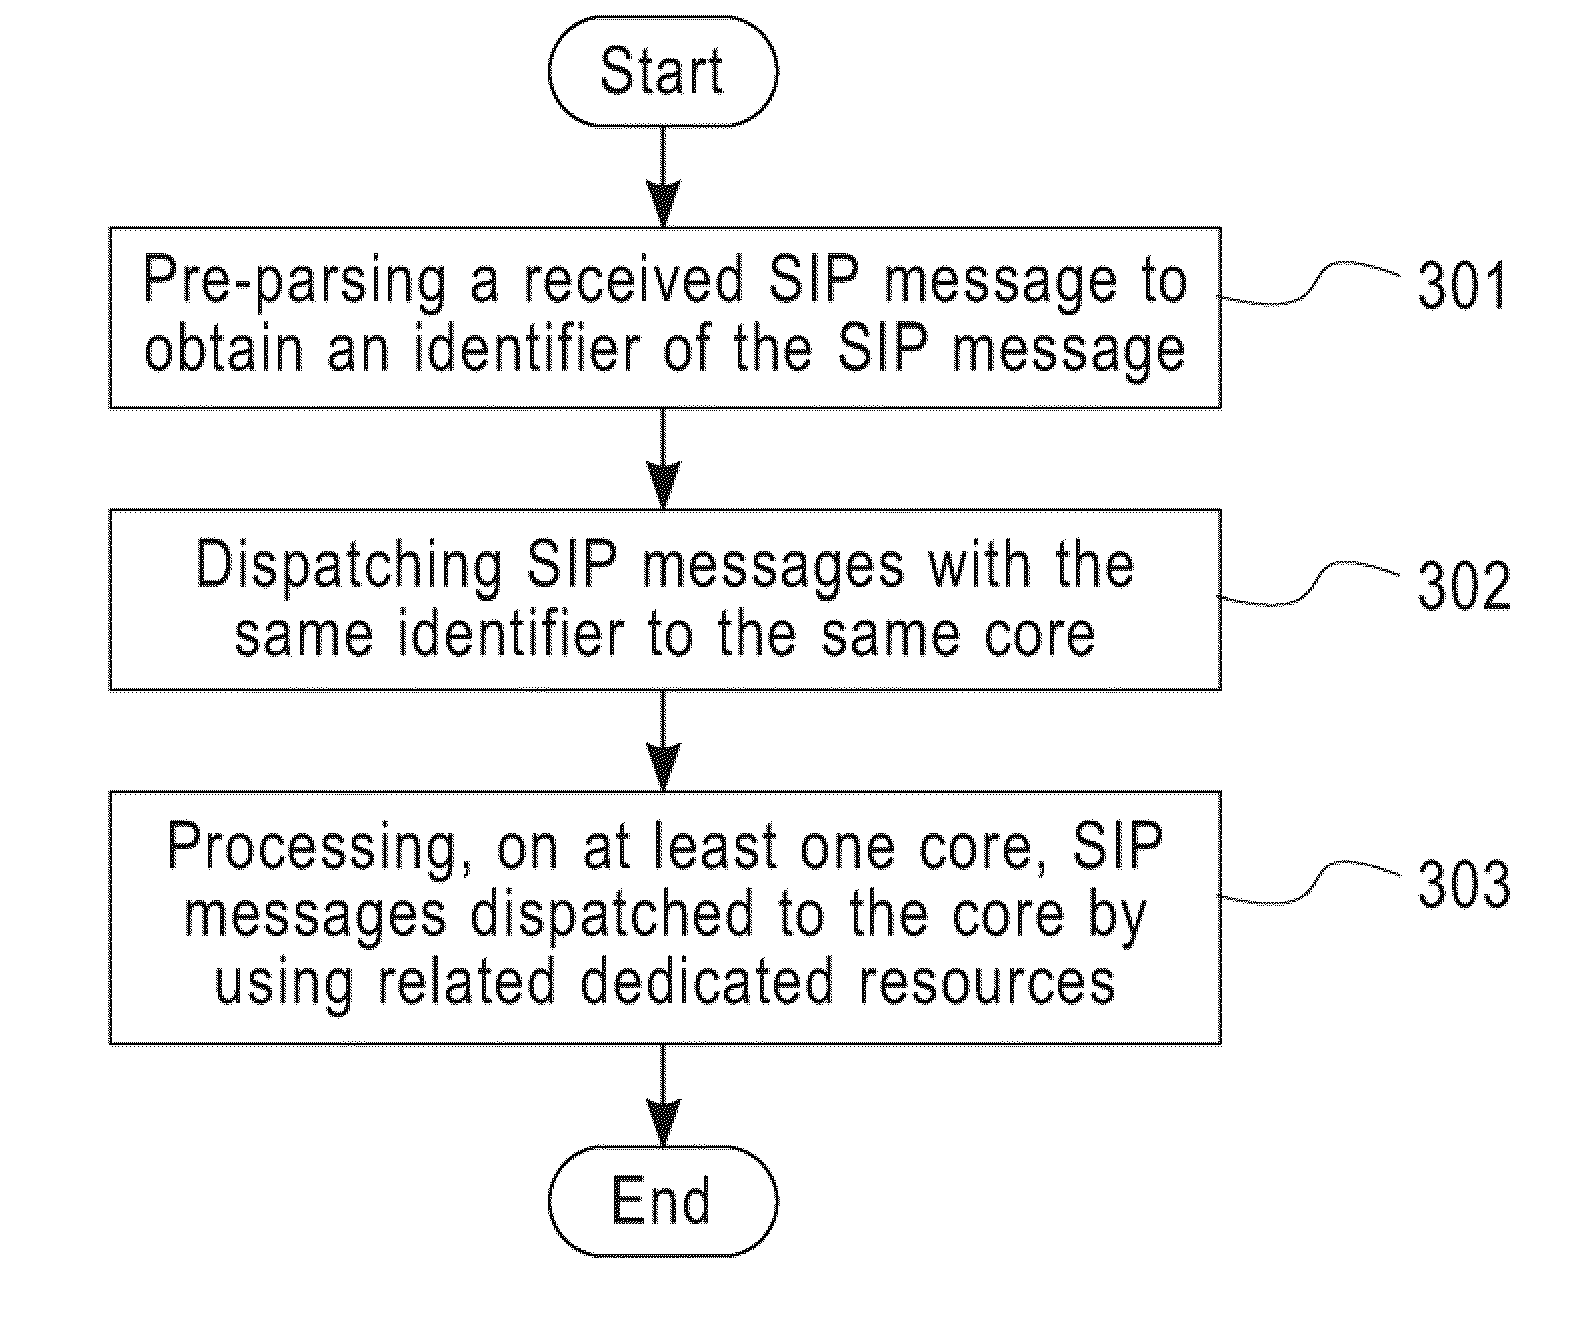 Processing SIP messages based on multiple cores